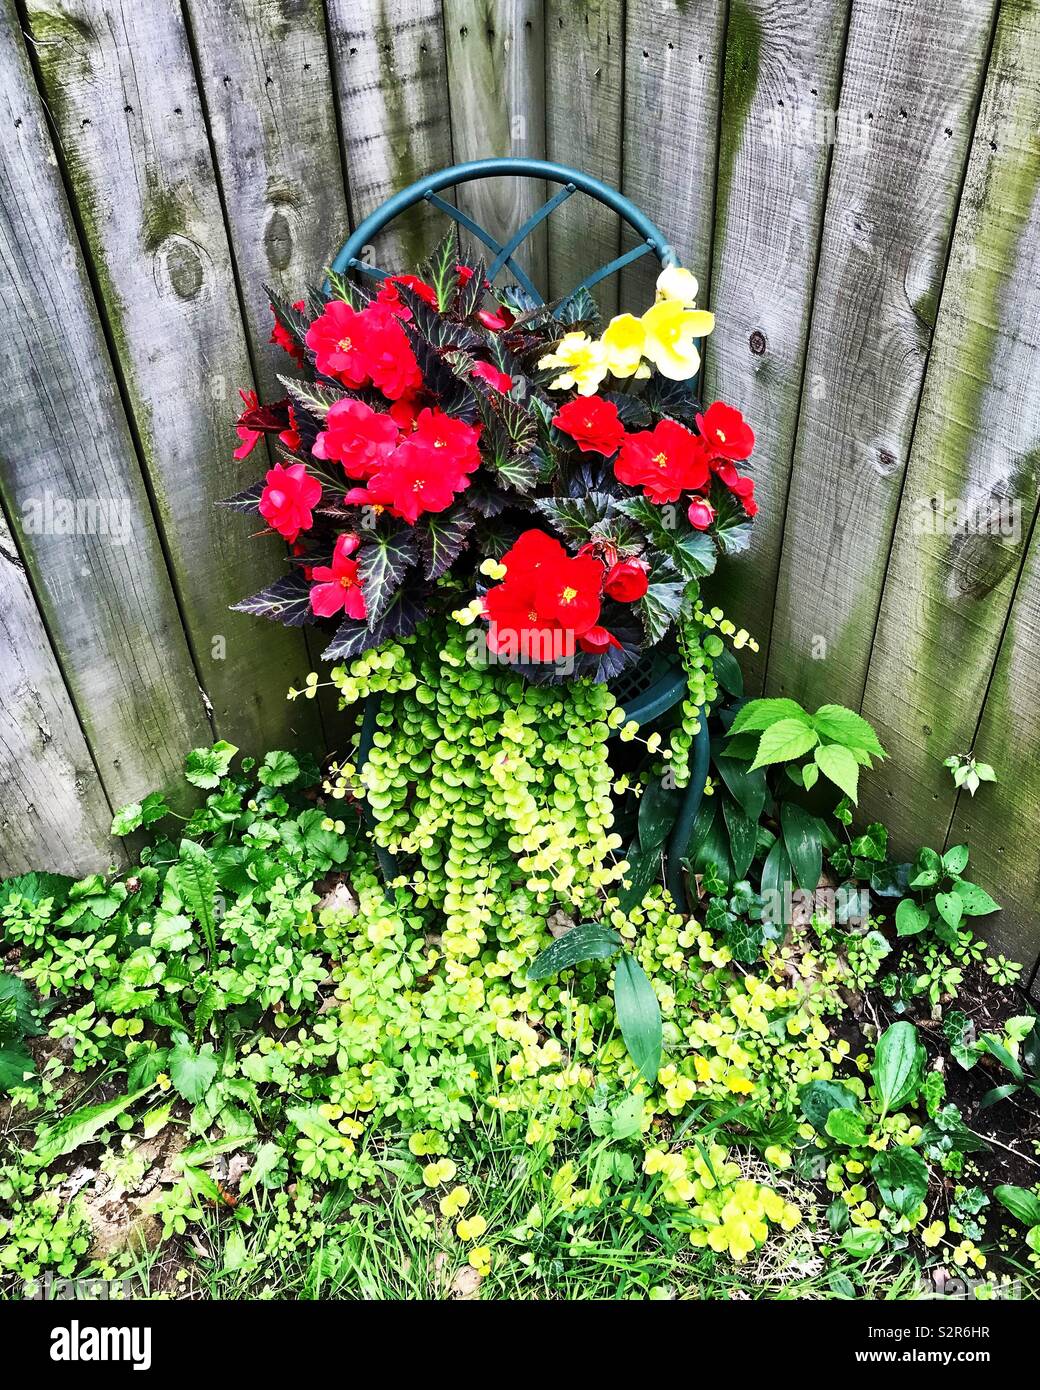 Nonstop begonia flowers and green creeping Jenny spilling over a chair in the backyard; wooden fence background Stock Photo